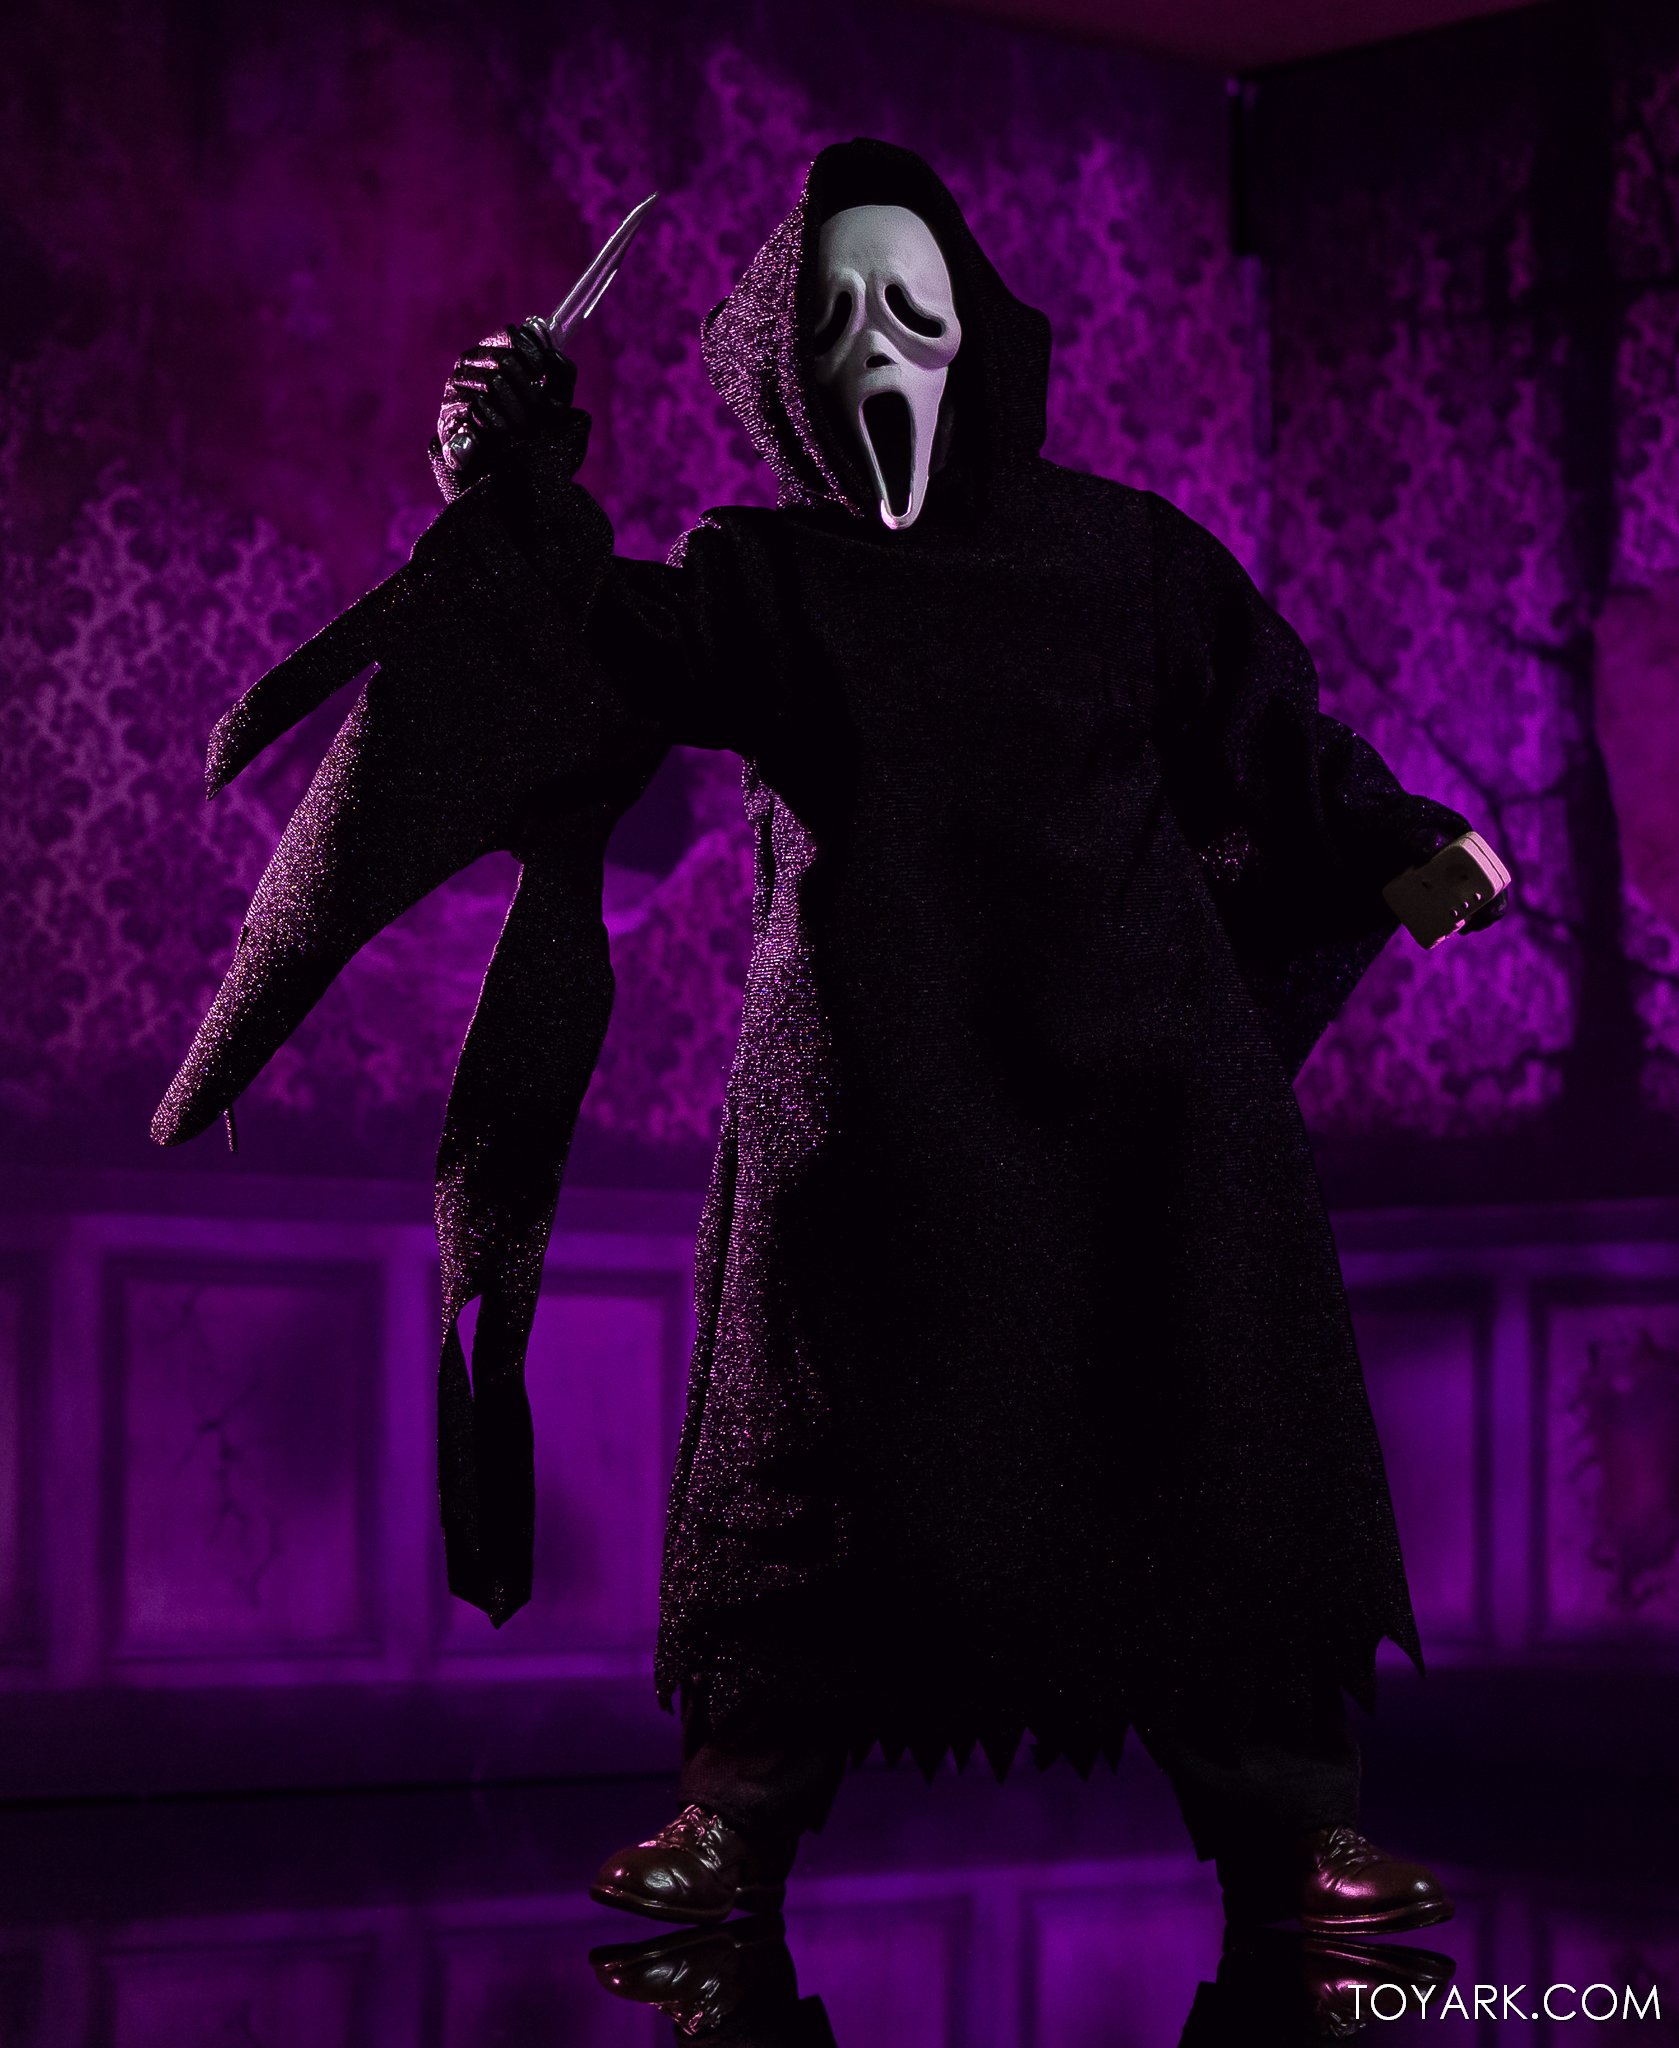 Scream Face 8 Inch Scale Clothed Figure By NECA Toys Photo Shoot